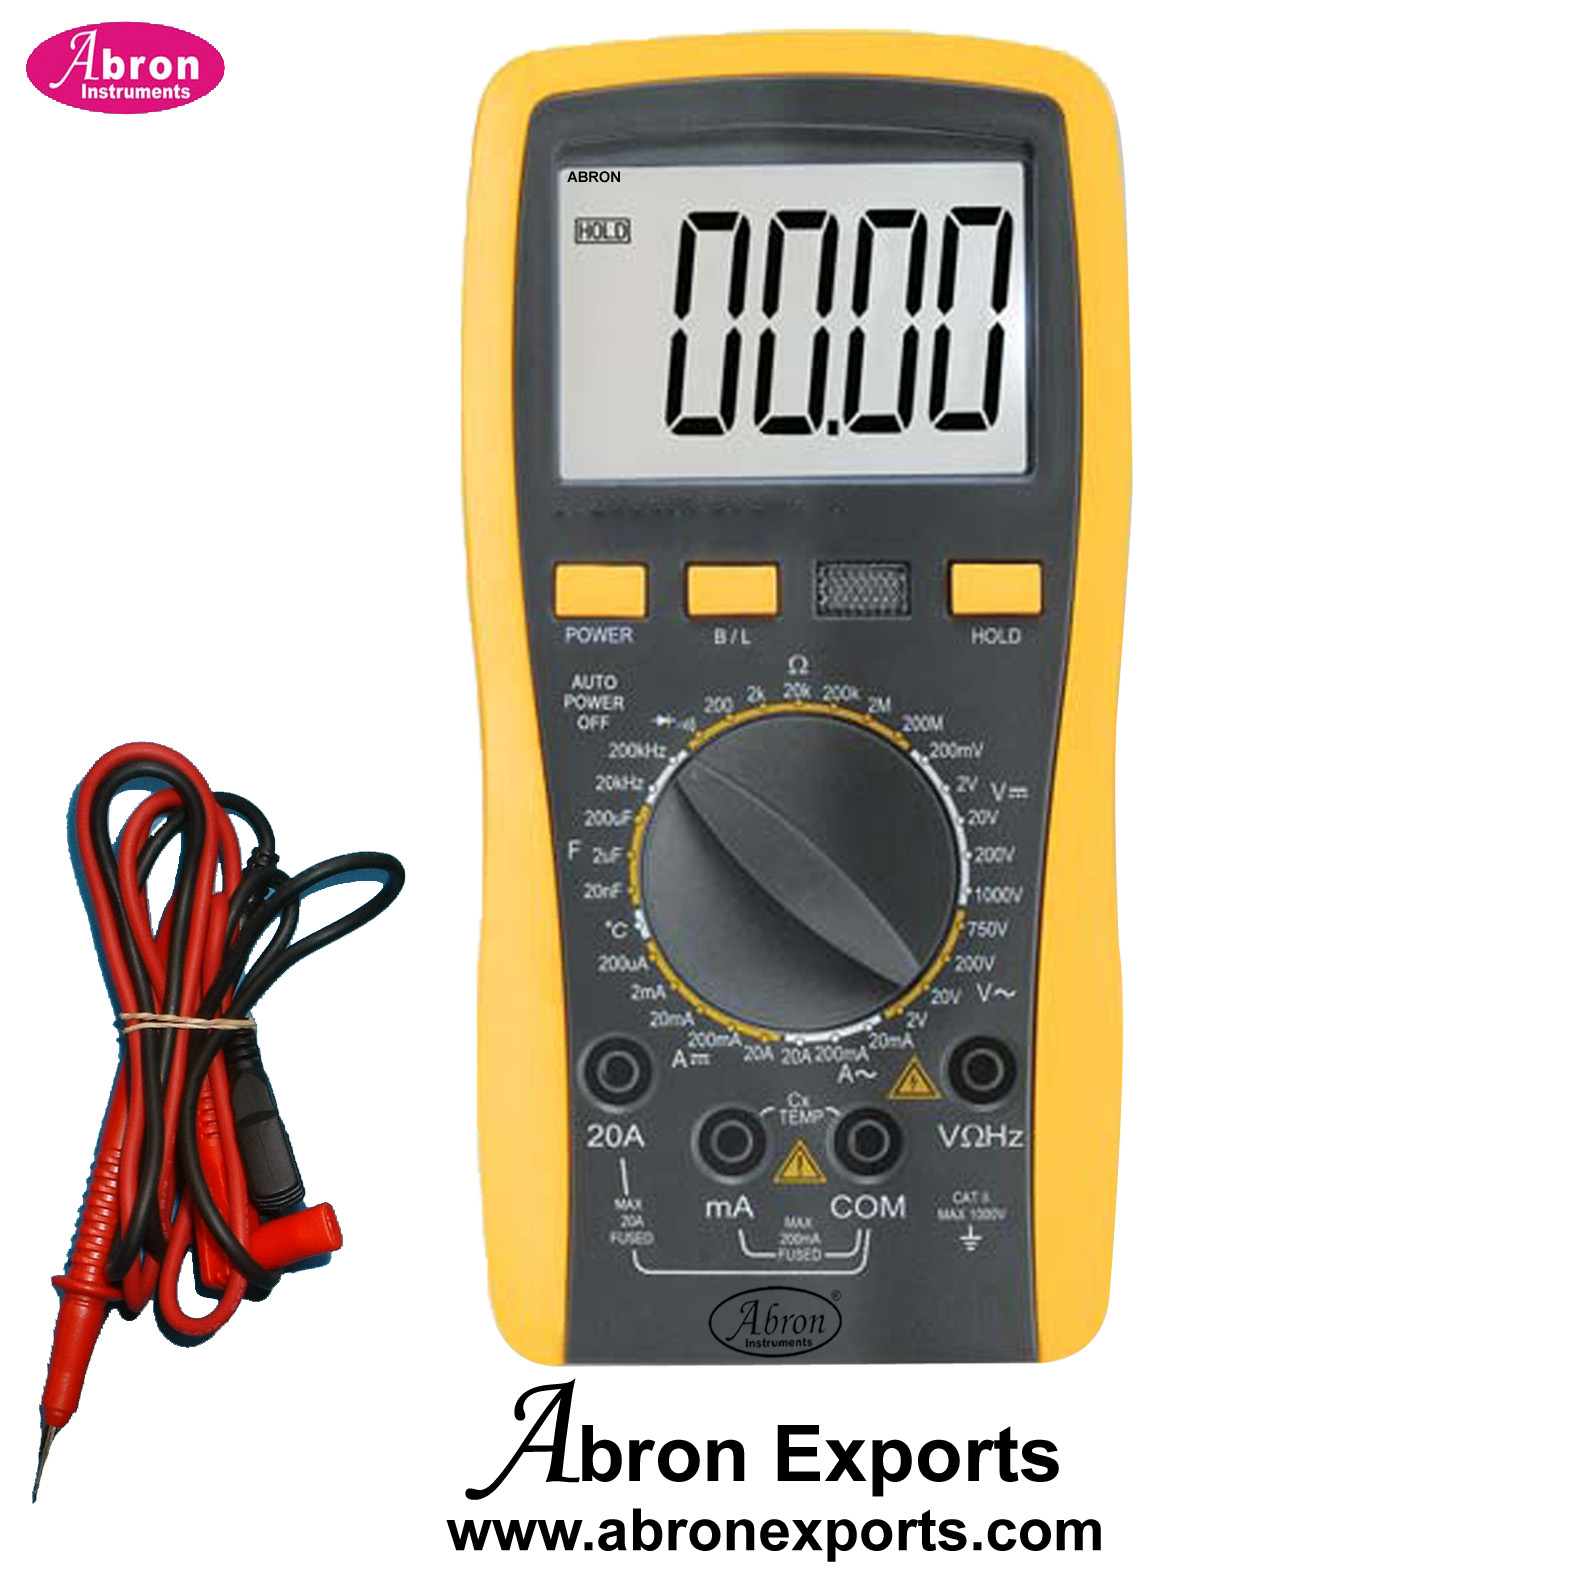 LCR Multimeter 4 Digital LCD Check Resistance 400 Ohms -40M Ohms Inductance 40 to 4MH Capacitance 4n to 400uA Battery 9V AE-1319B4  